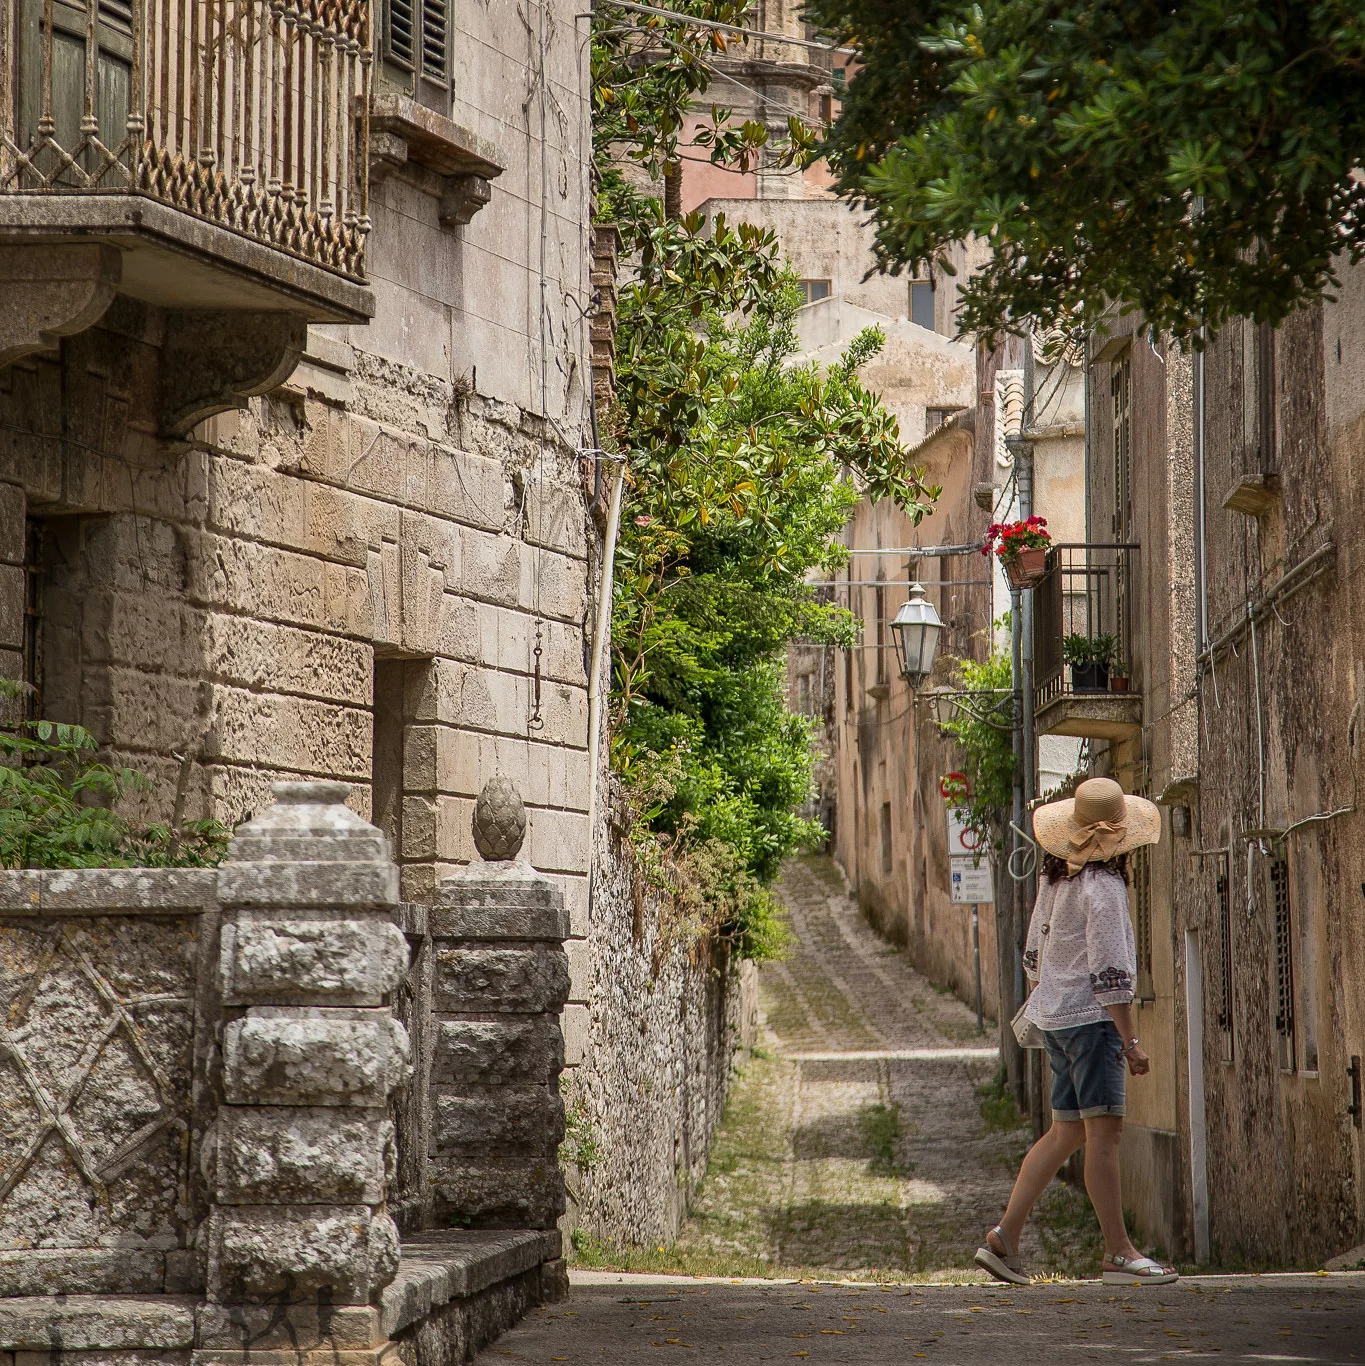 The streets of Erice in Italy